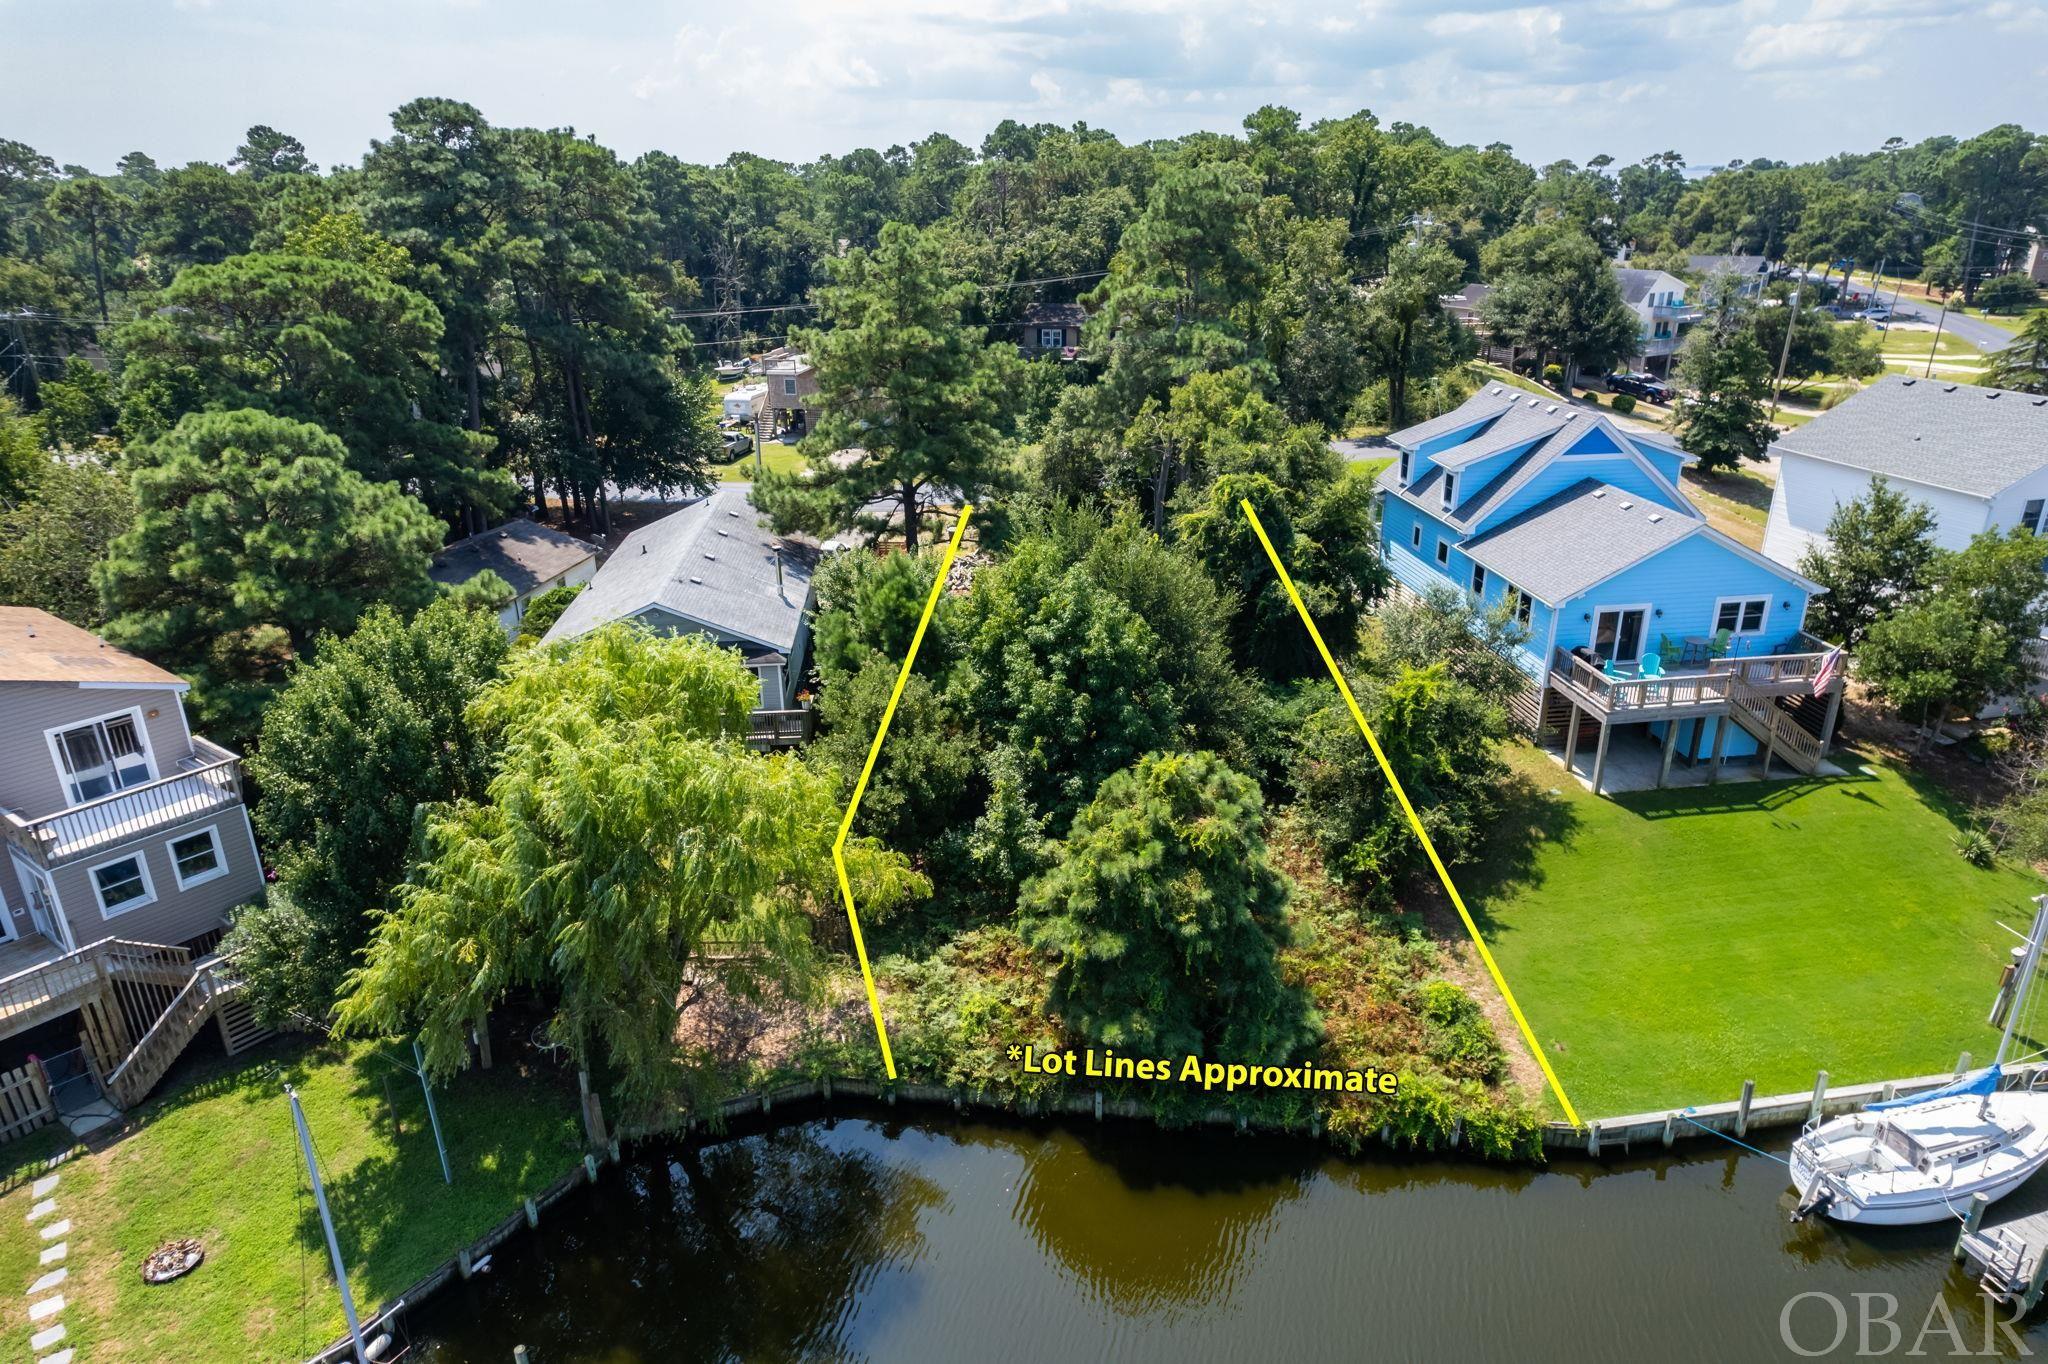 Canal front lot available for a custom-built home in the gated community of Colington Harbor.  Perfect for the boating enthusiast, this bulkheaded lot sits on one of the many deep and wide canals in this predominantly year-round island community.  The Harbor features fantastic boating access to the wide-open waters of the Albemarle Sound and is just 10 miles from the Intercoastal Waterway.   Enjoy the marina, sound side park, club house, or swim and tennis club among the many community amenities offered.  Located just far enough away from the daily hustle, yet convenient to the local restaurants, shopping and attractions of Kill Devil Hills and surrounding areas, this tranquil homesite will provide the opportunity for true waterfront living.